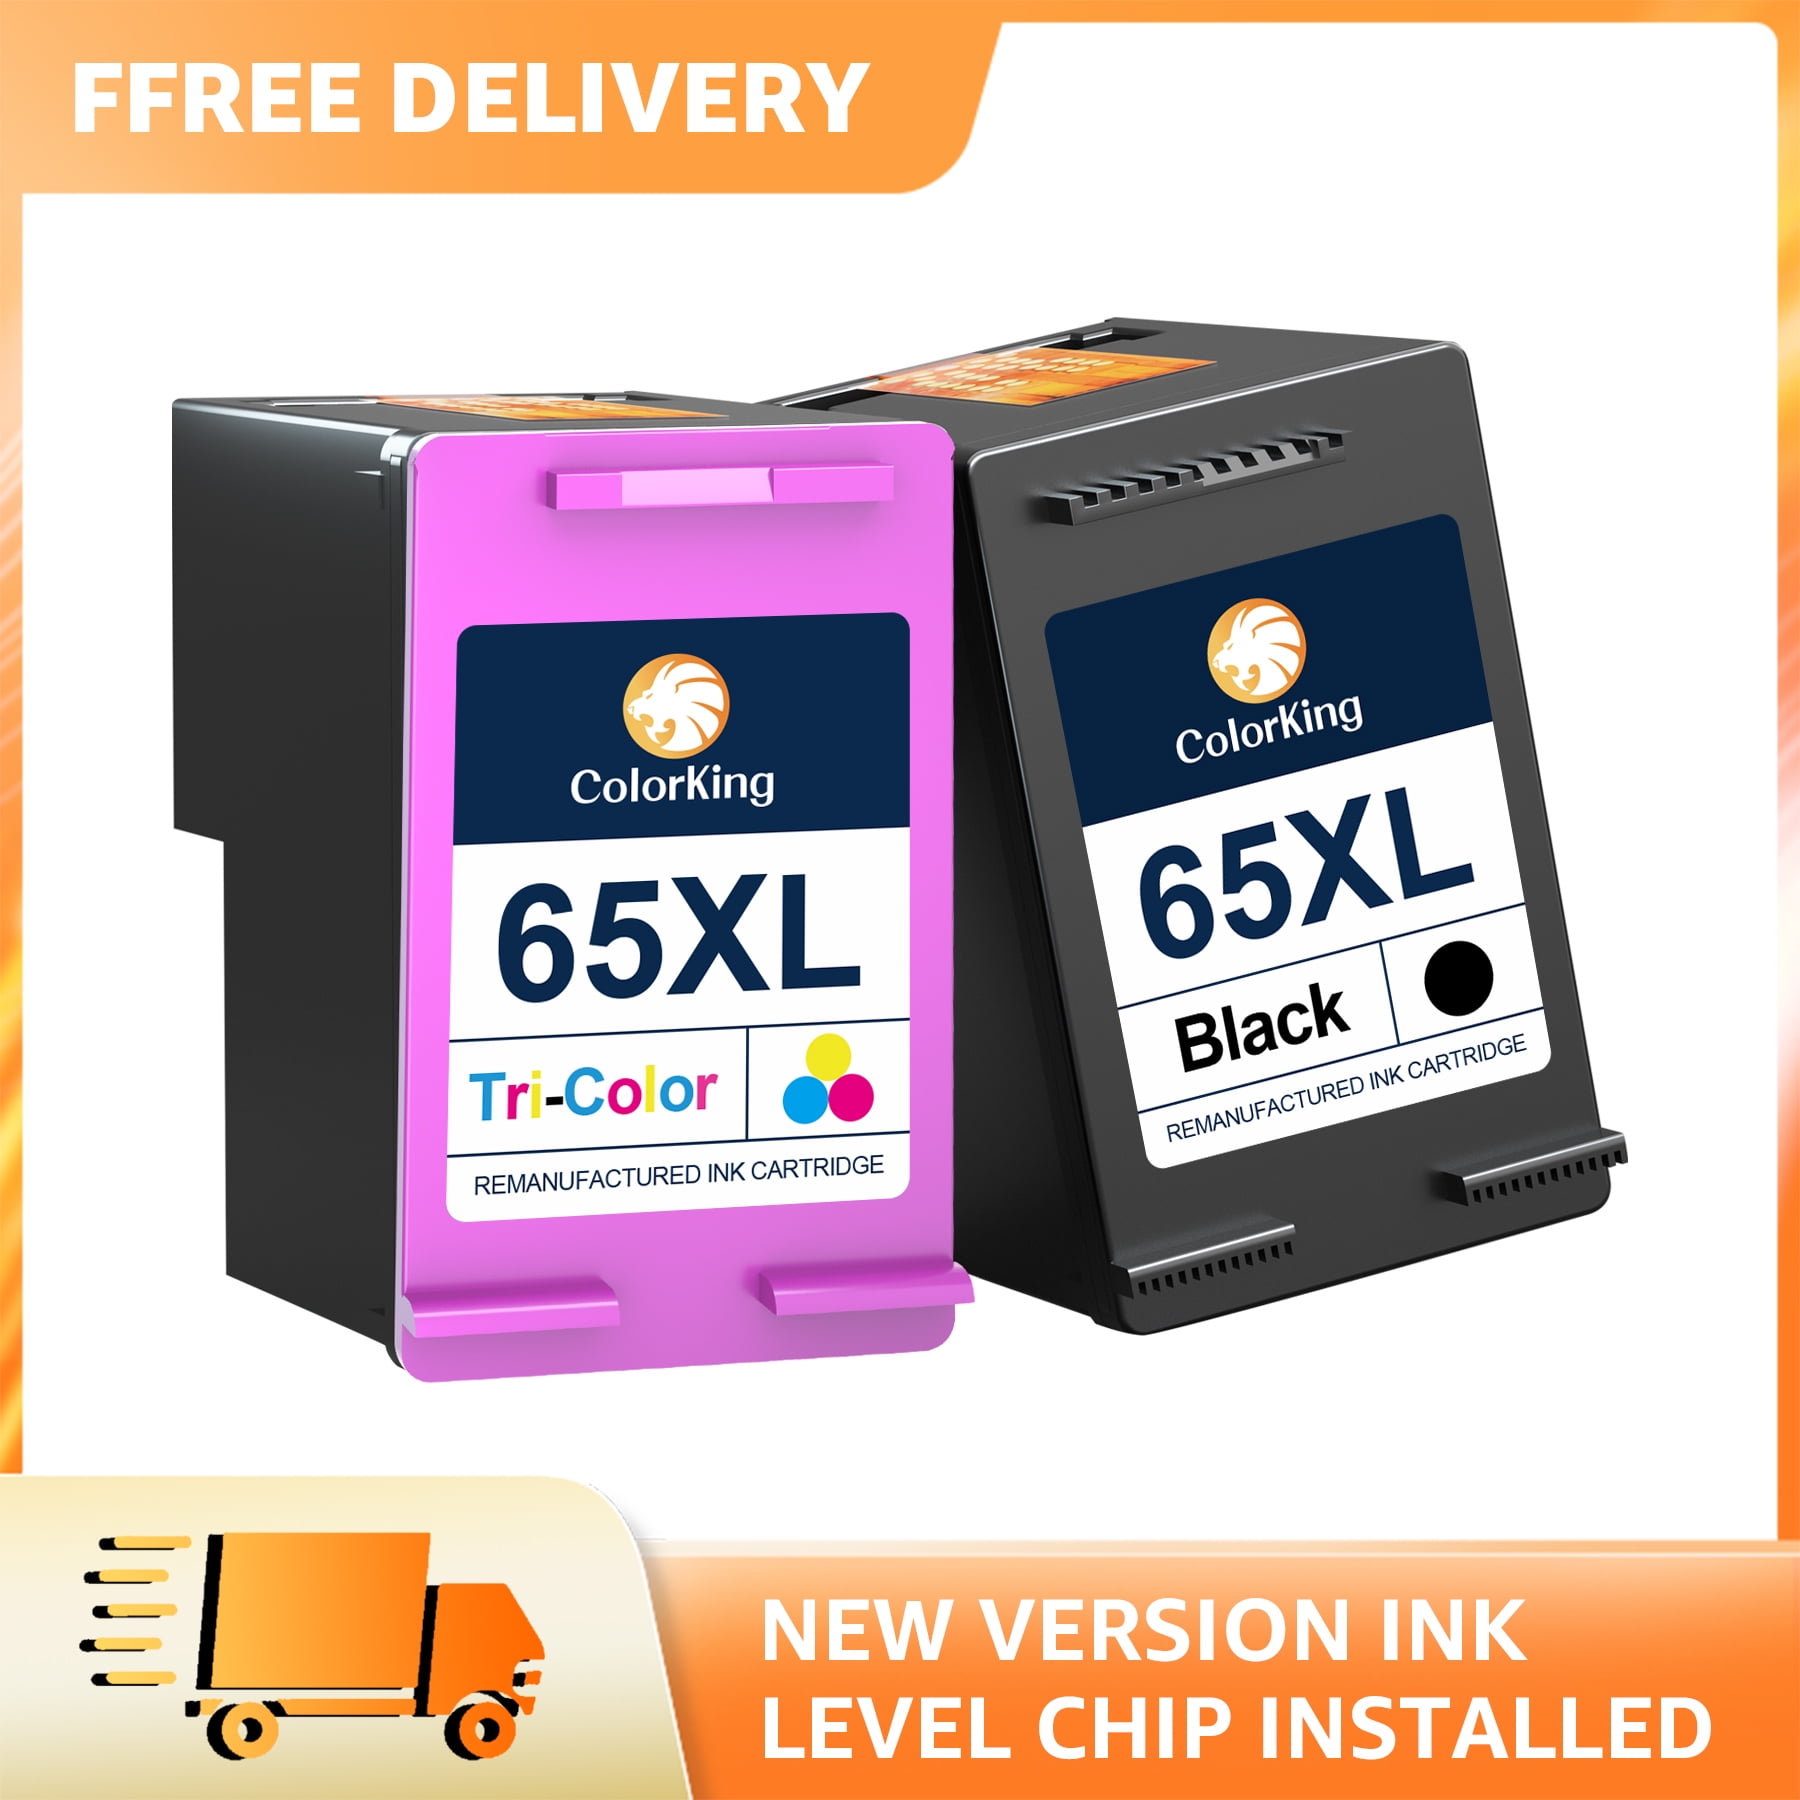 Colorking 65XL Cartridges Replacement for HP Printer Ink 65 Black and Color to Use with Deskjet 2622 2624 2652 2655 3720 3721 3722 3723 3732 3758 Envy 5052 Pack)